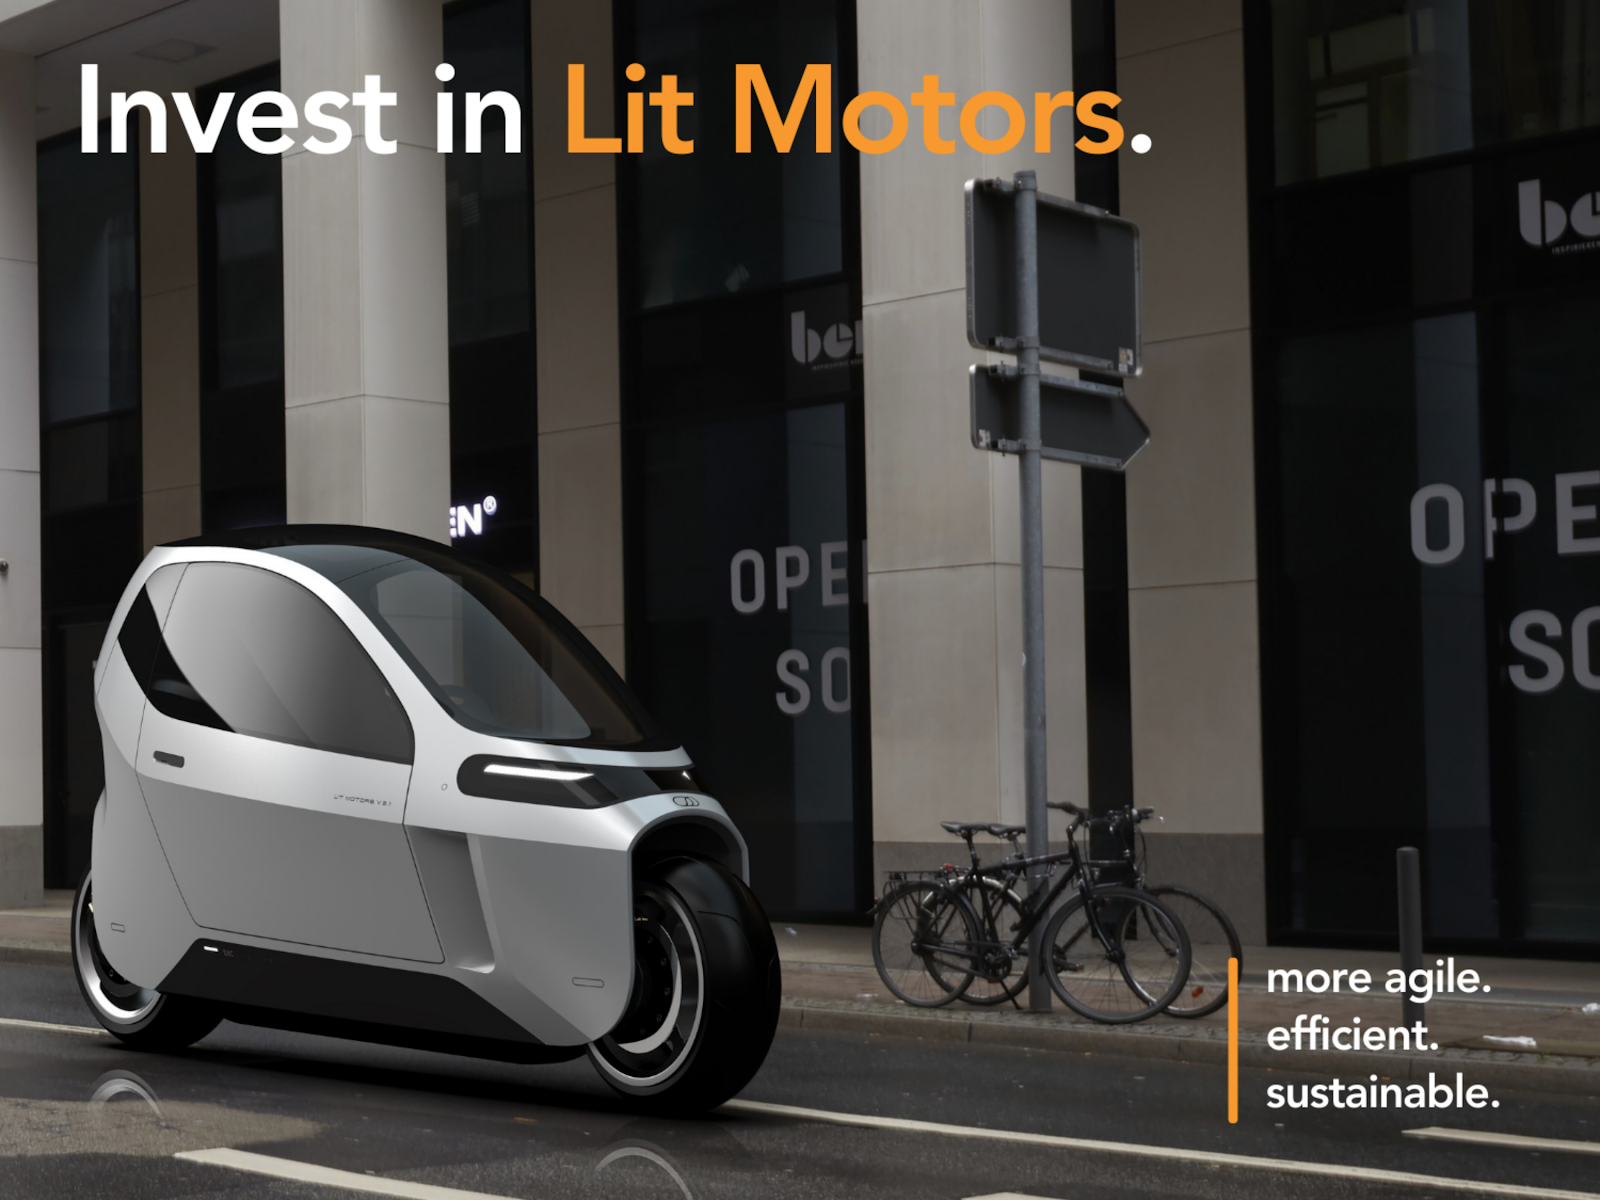 Invest in Lit Motors. More agile, efficient, sustainable. Rendering of Lit Motors AEV parked in a city scape.